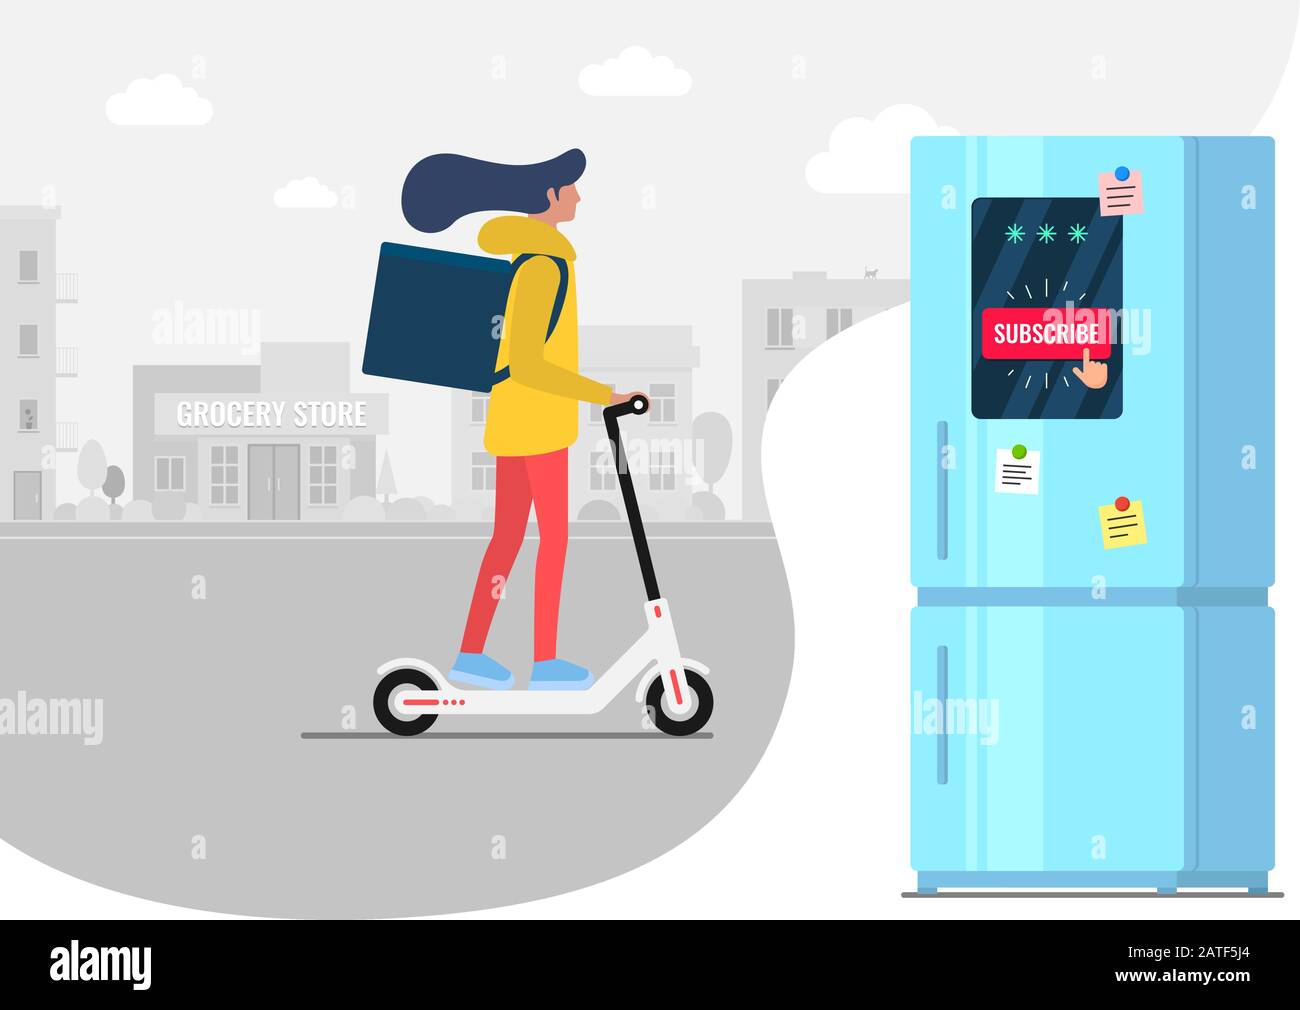 Product subscribe ordering and delivery by female on electric kick scooter service concept. Subscription online shopping goods app from supermarket. Girl shipping food from grocery store flat vector Stock Vector